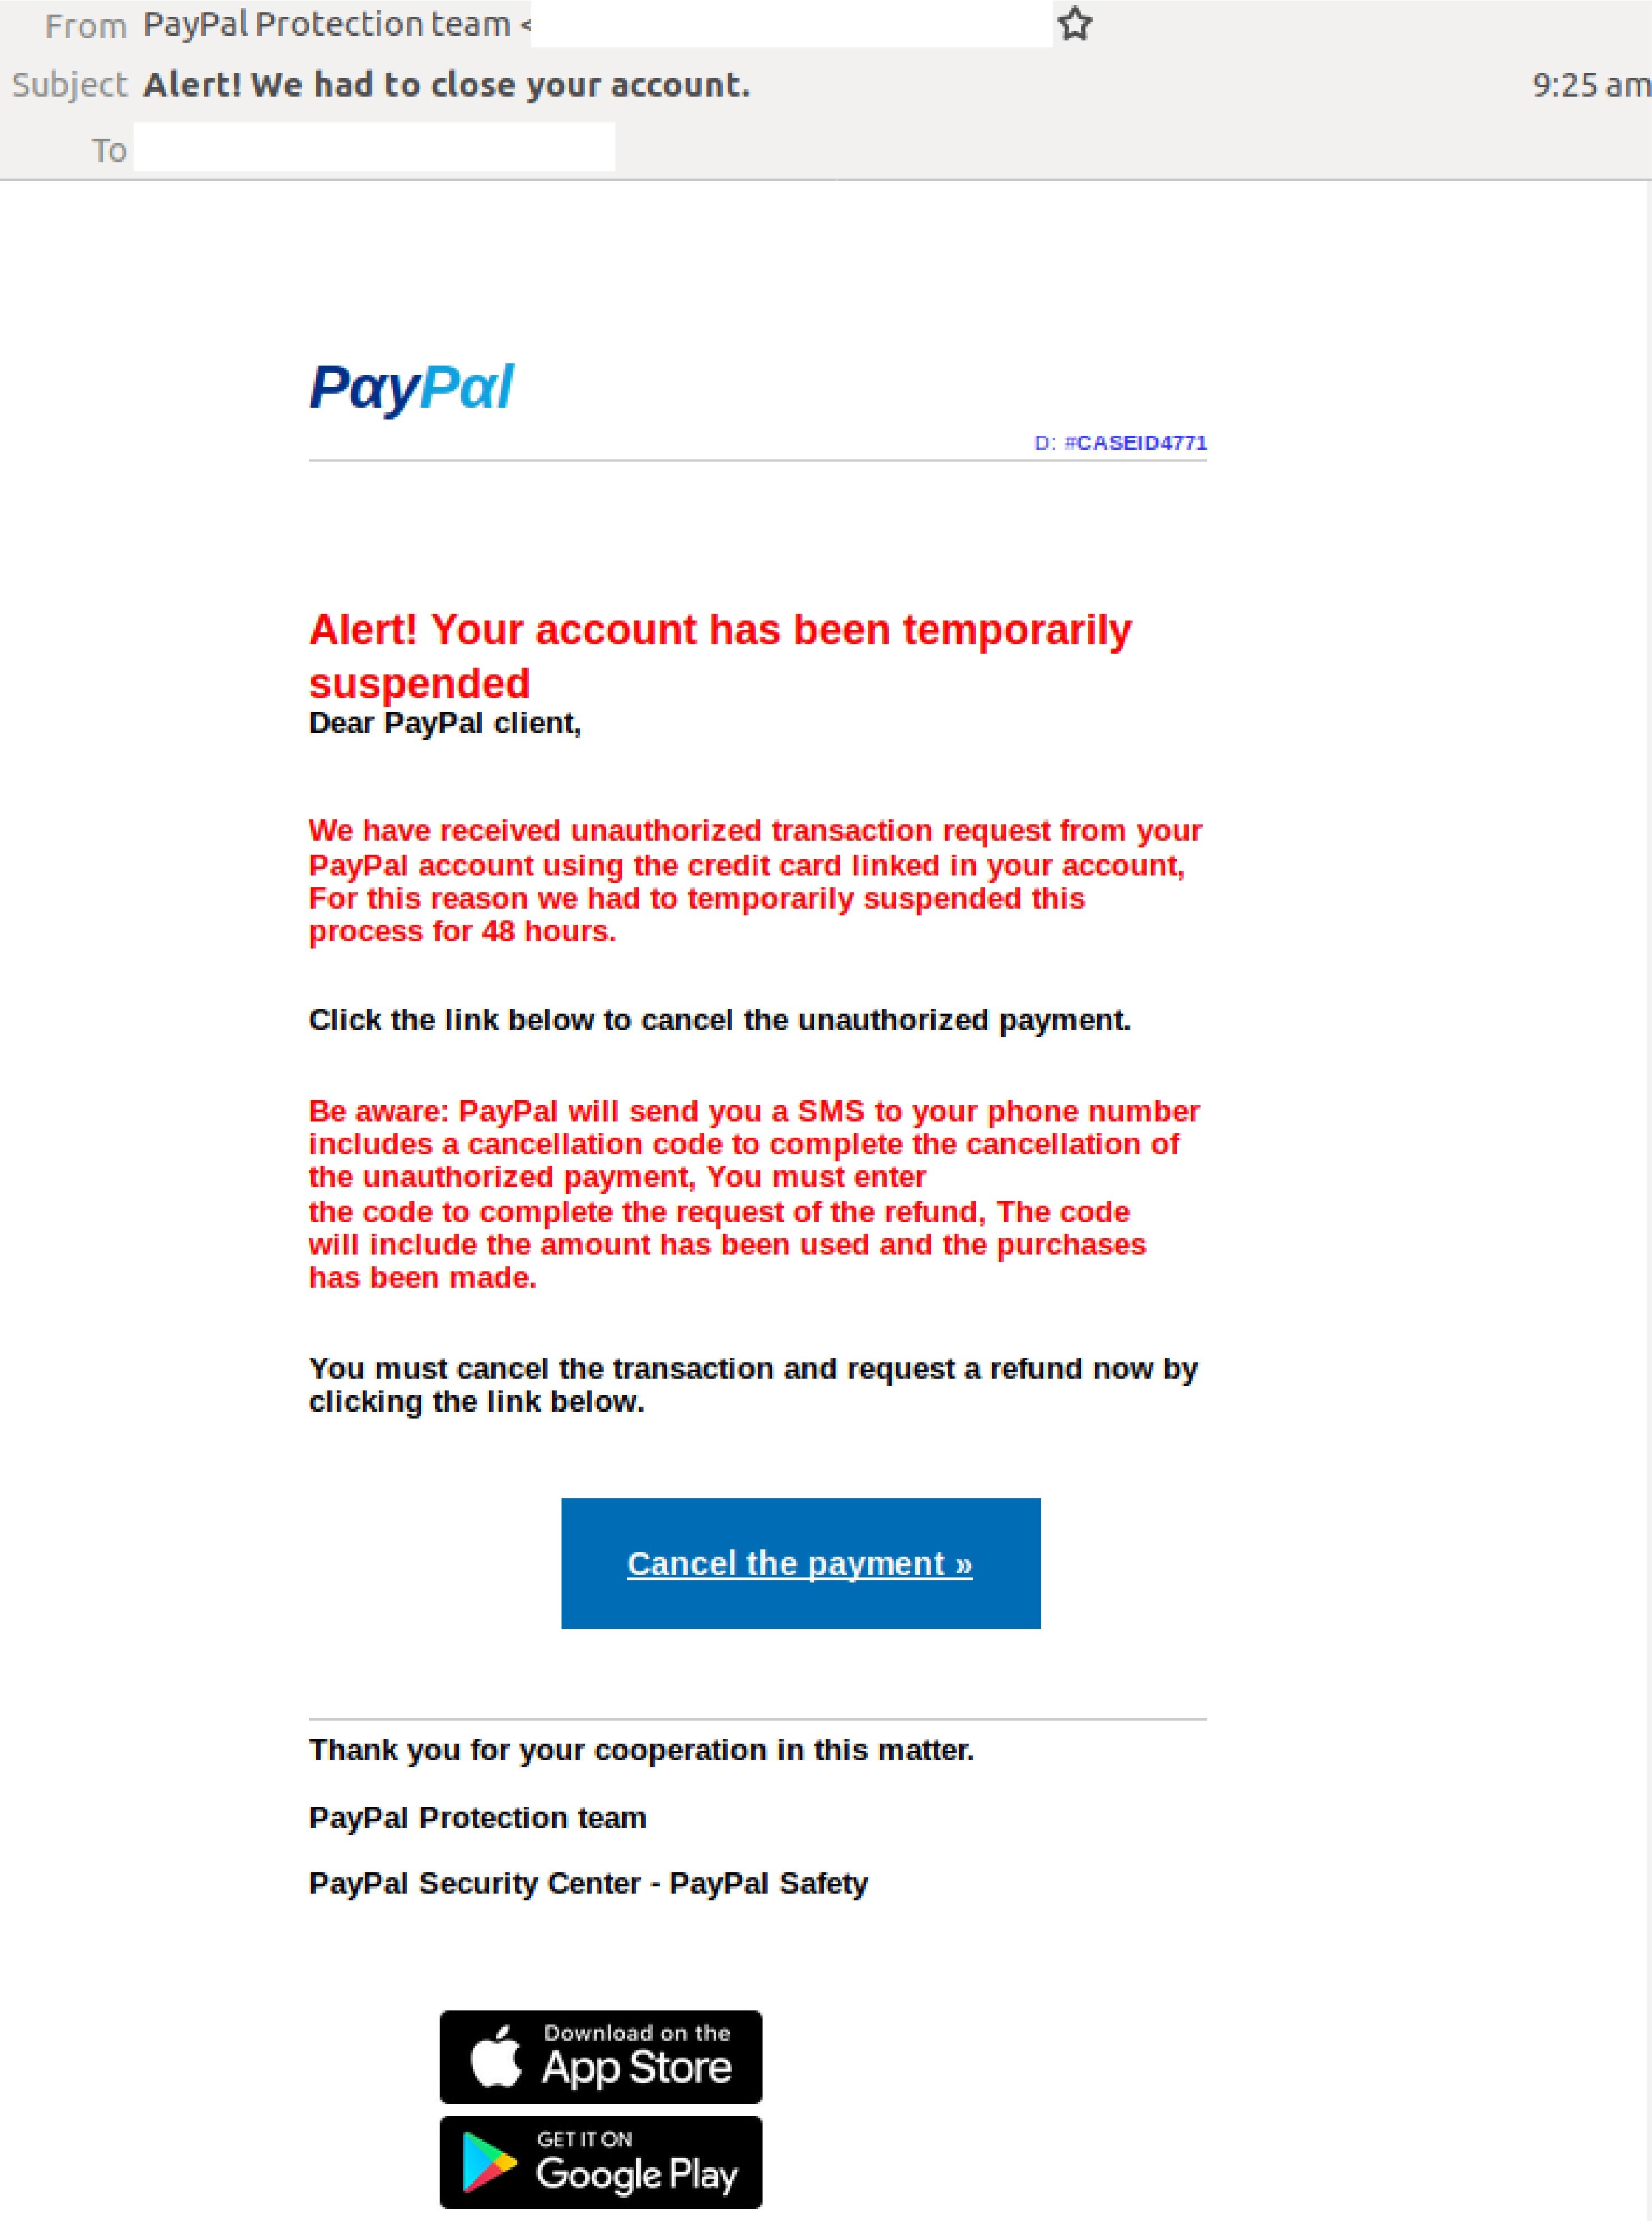 paypal dogecoin email scam